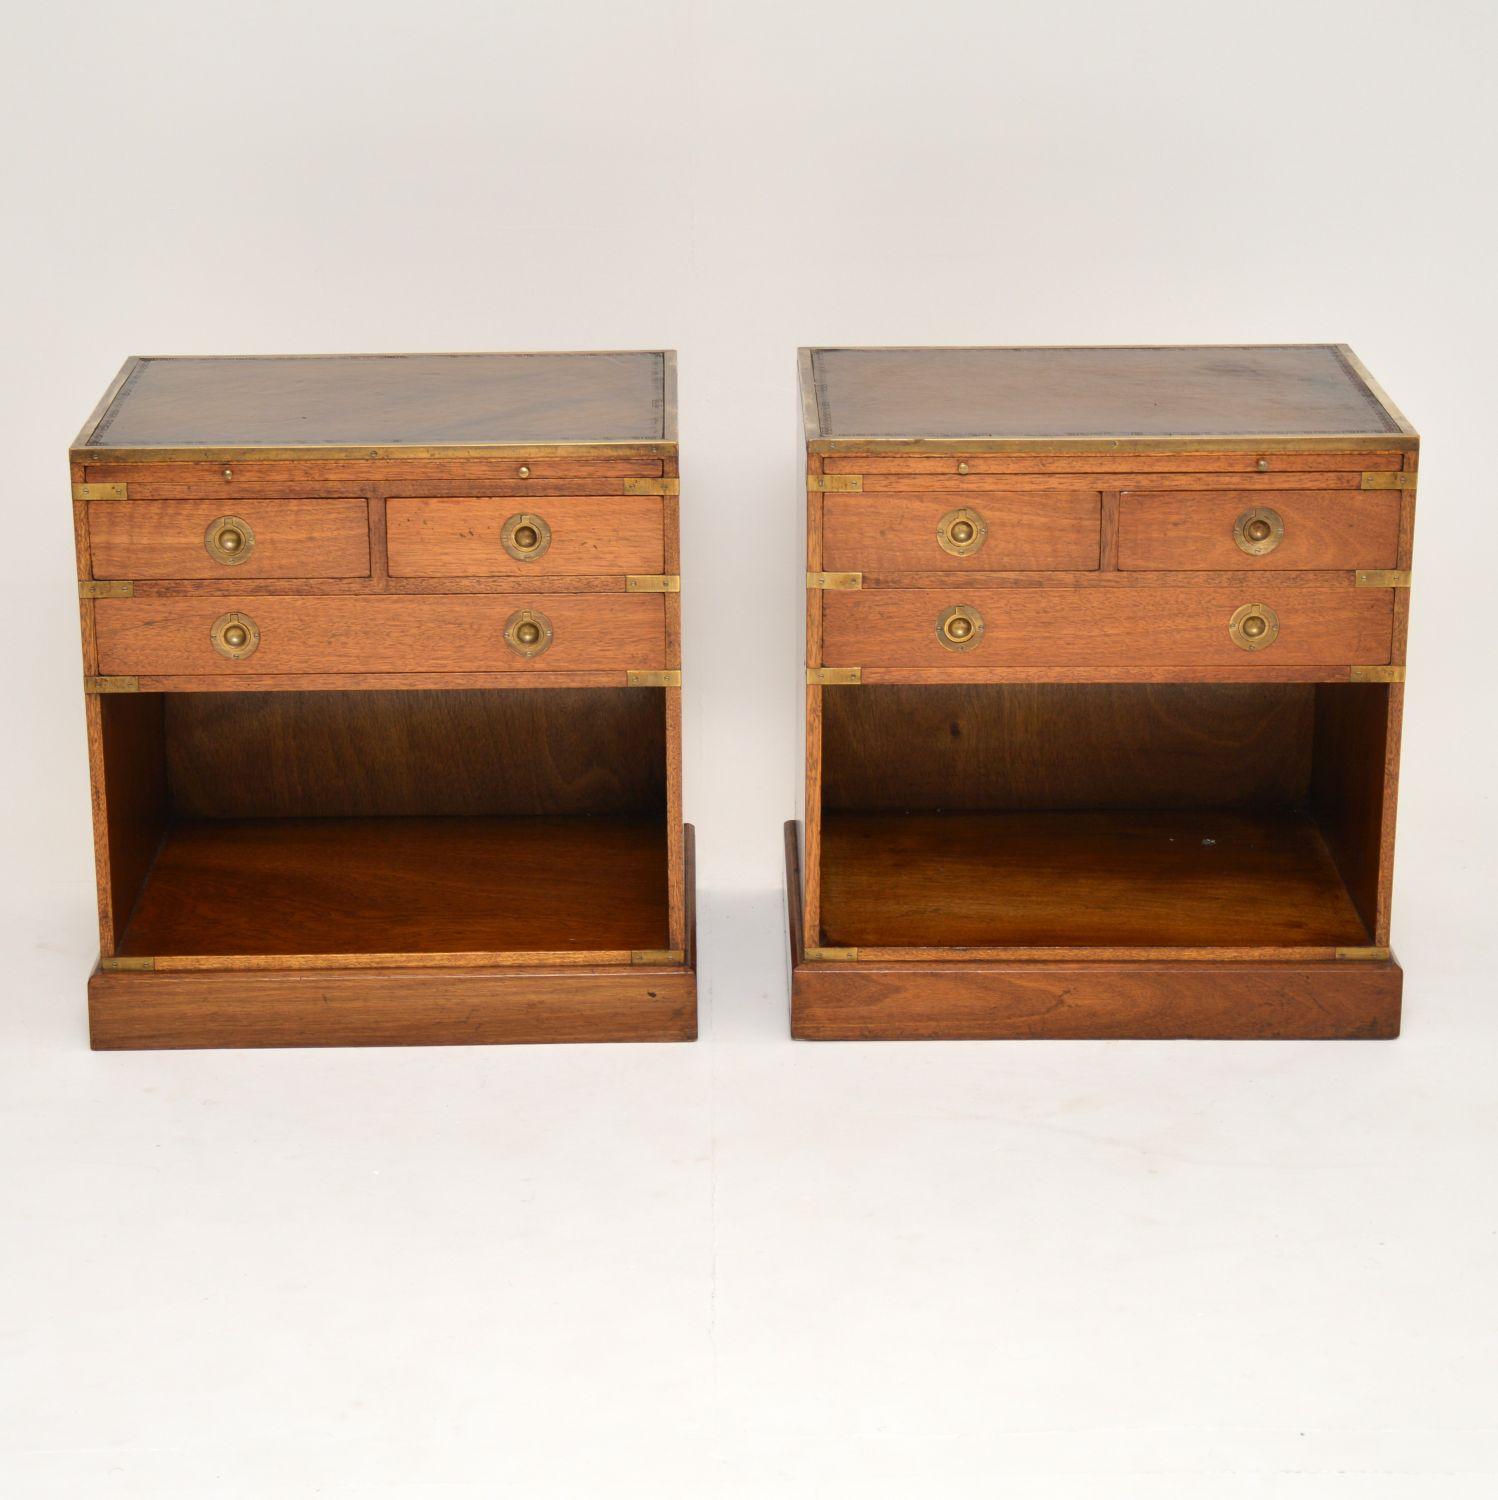 Pair of antique mahogany military Campaign style side cabinets in very good original condition & with some nice features. They have great proportions & would be ideal as general side cabinets in a living room or even as bedside cabinets. These